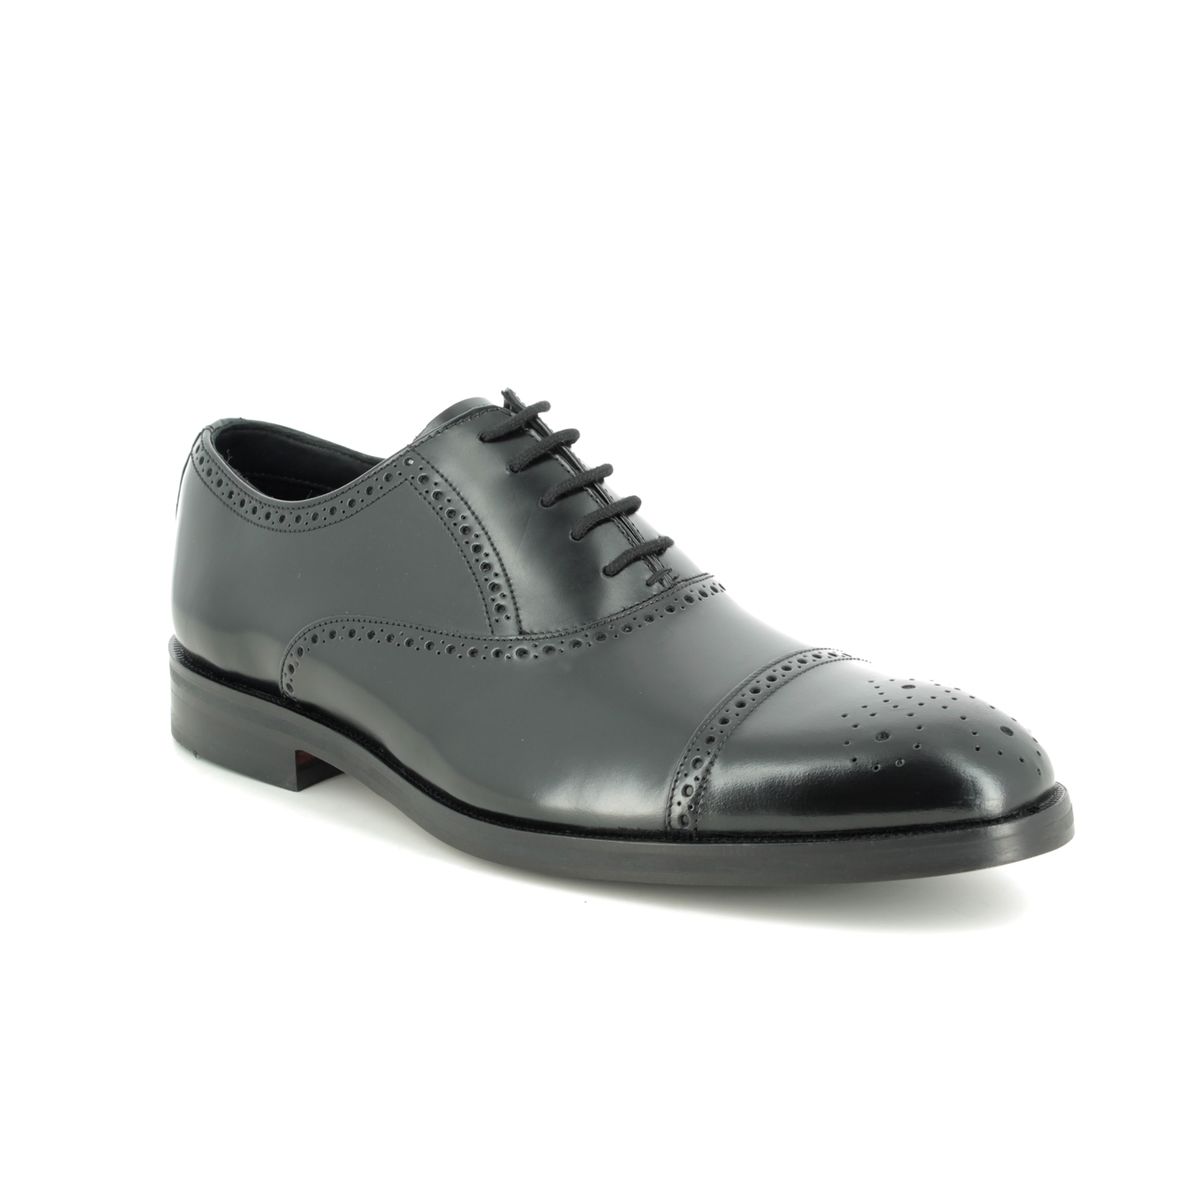 Clarks Oliver Limit Black Leather Mens Brogues 436467G In Size 8 In Plain Black Leather G Width Fitting